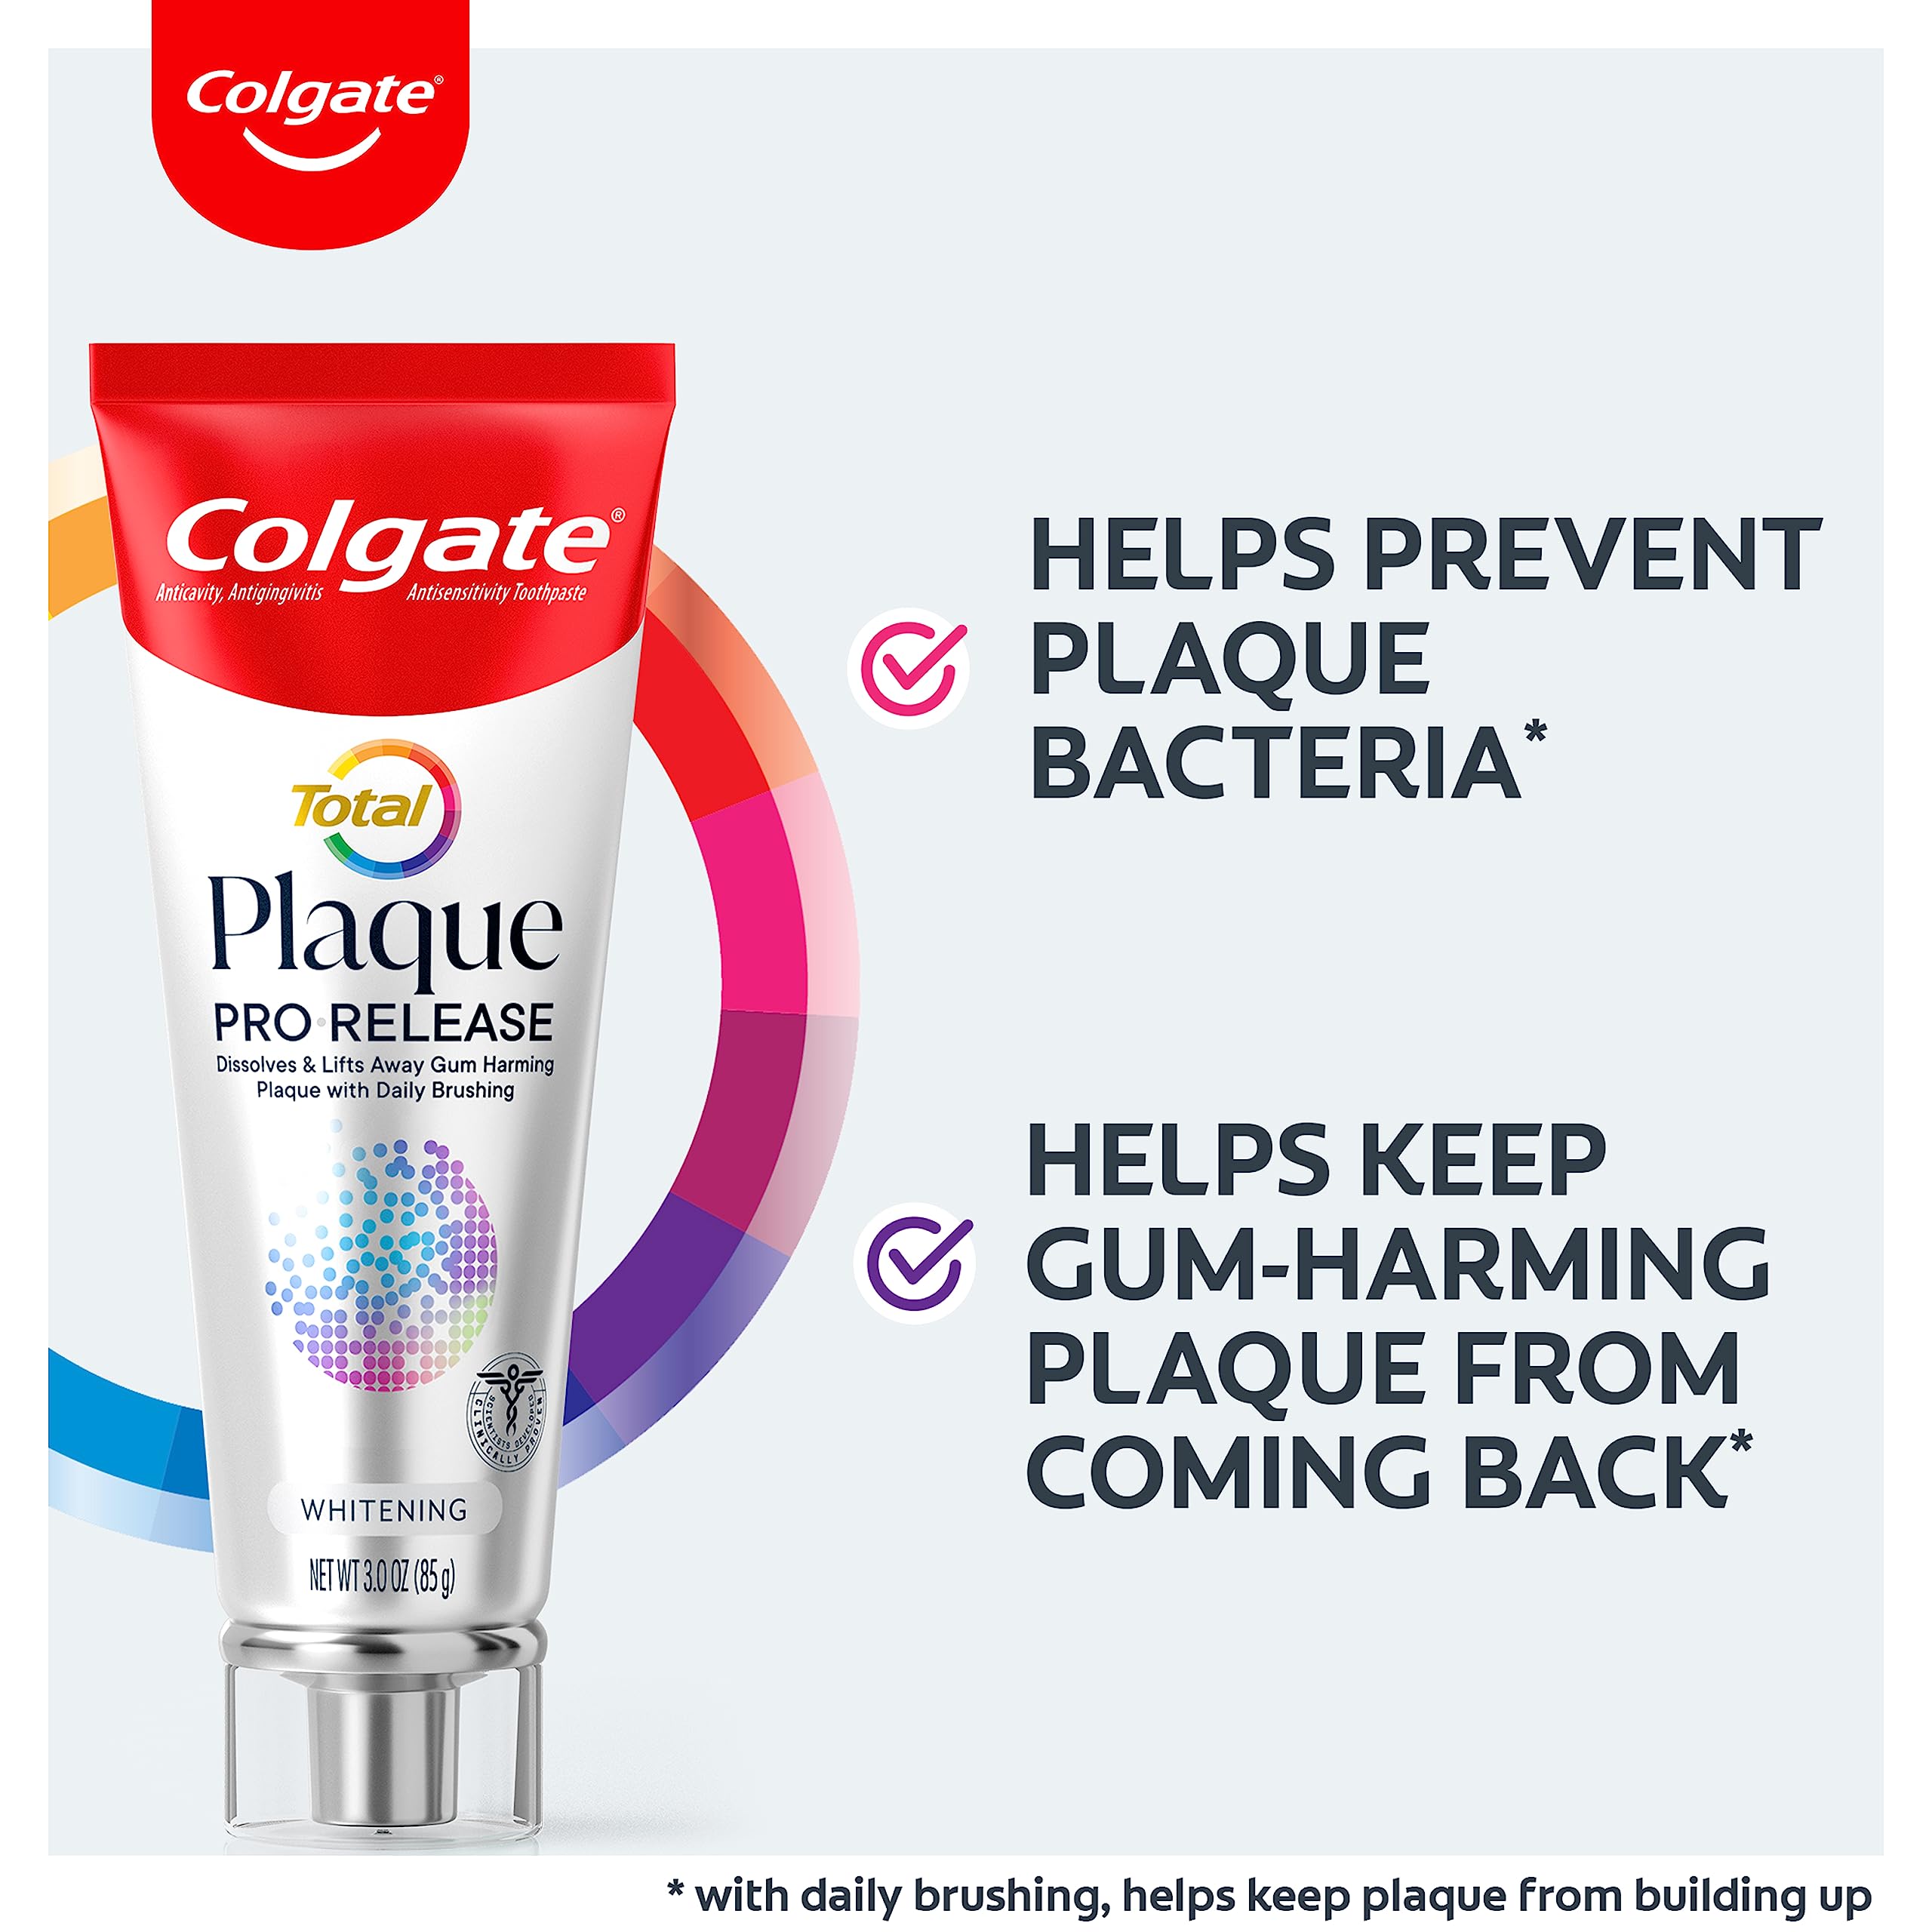 Colgate Total Plaque Pro Release Whitening Toothpaste, 3 Oz Tube, 2 Pack